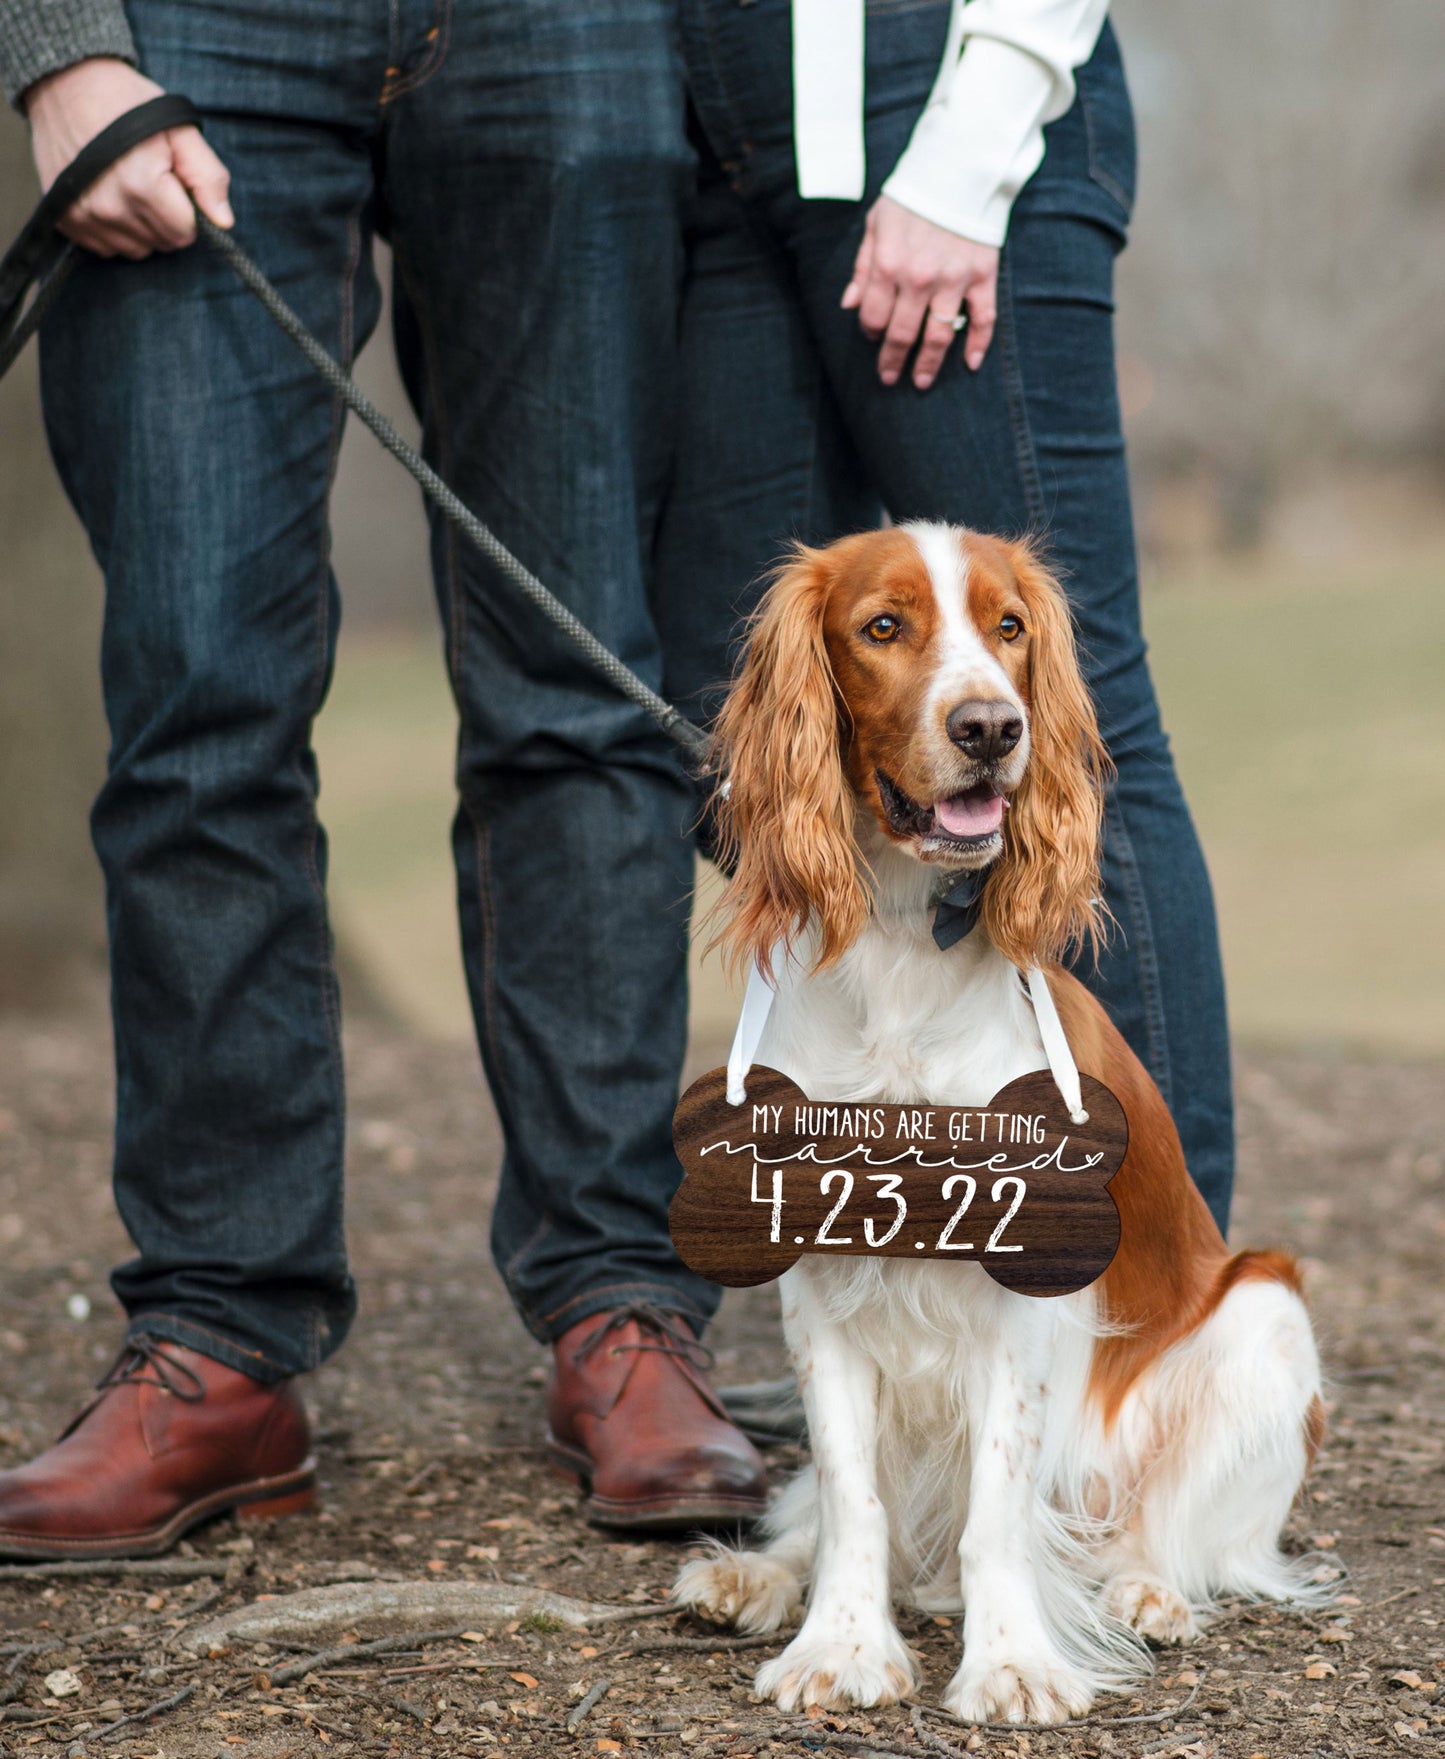 Pet Sign for Engagement Save the Date Photography - Wedding Decor Gifts